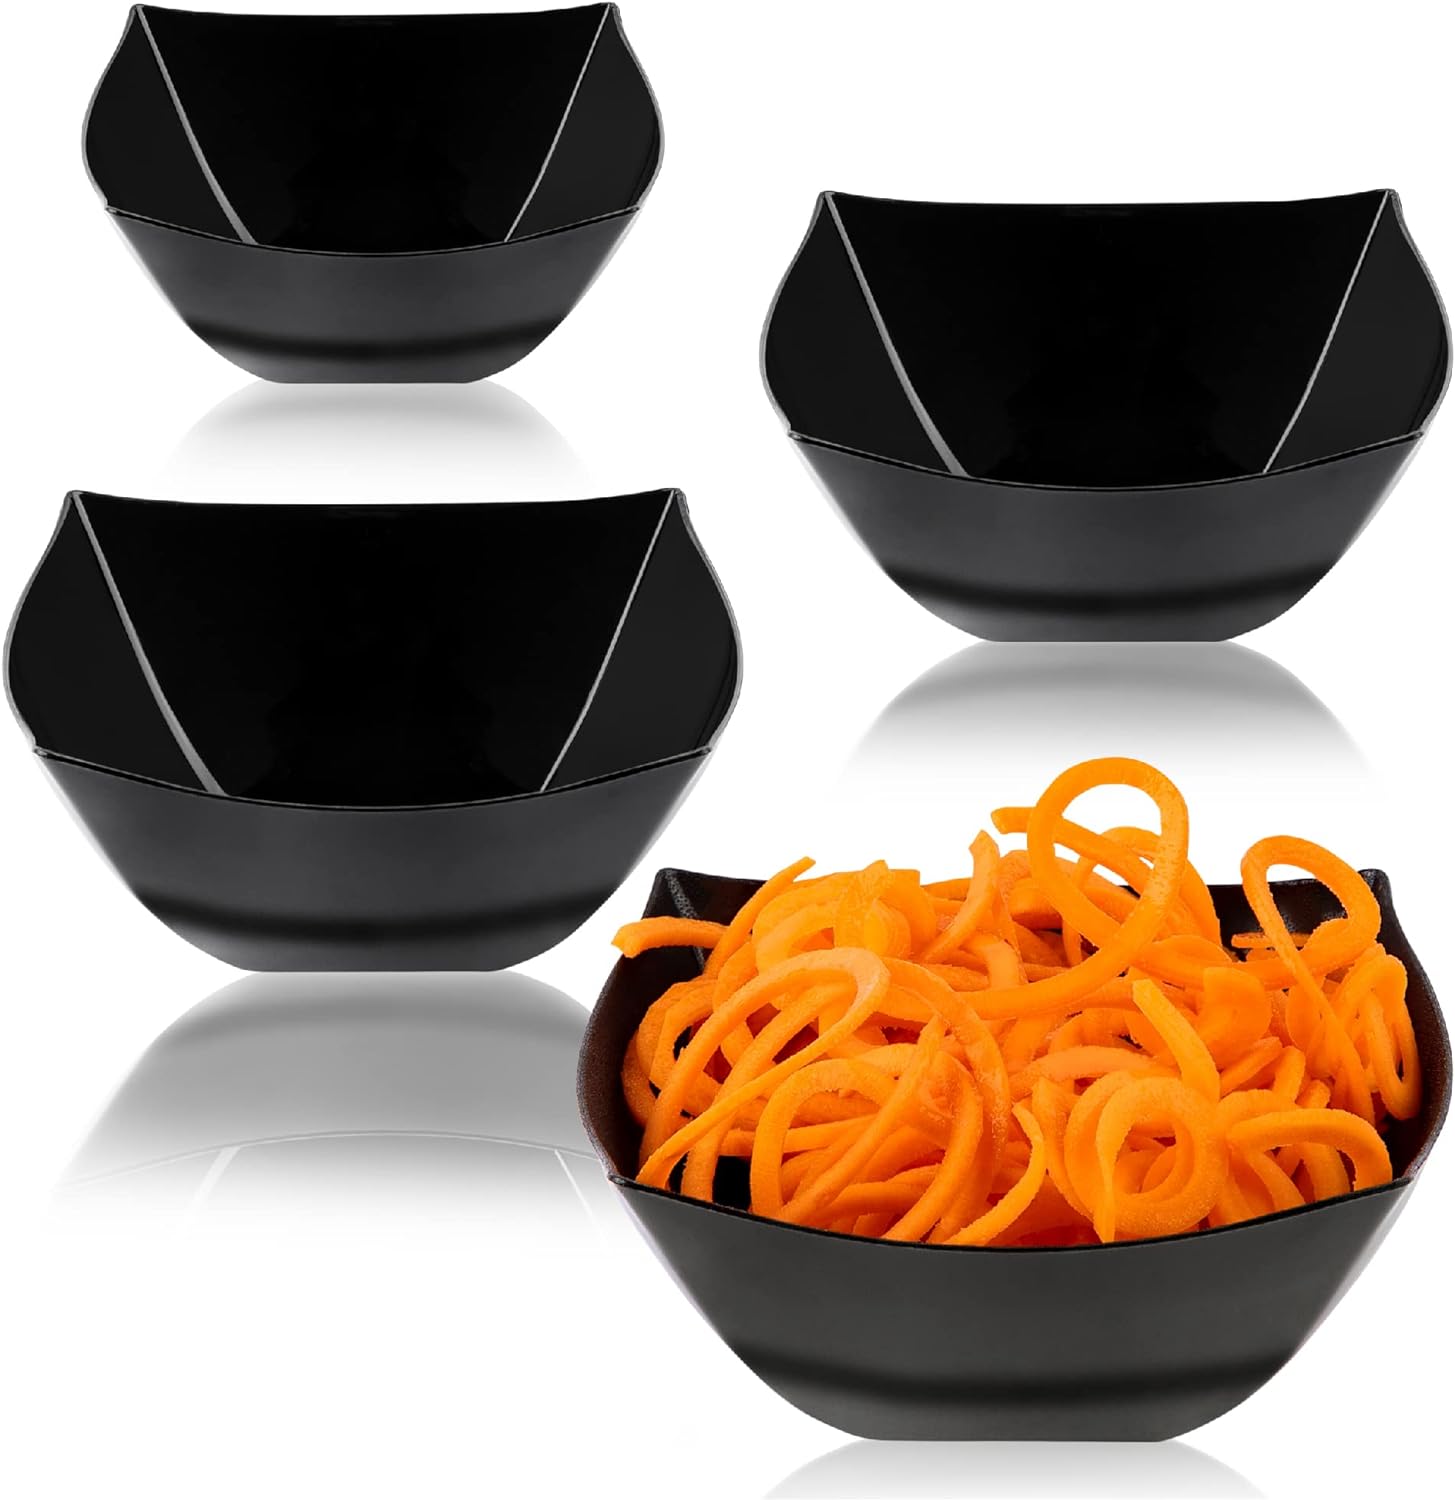 PLASTICPRO Disposable Square Serving Bowls, Party Snack or Salad Bowl, Plastic Black Pack of 4, 8 OUNCE, Black